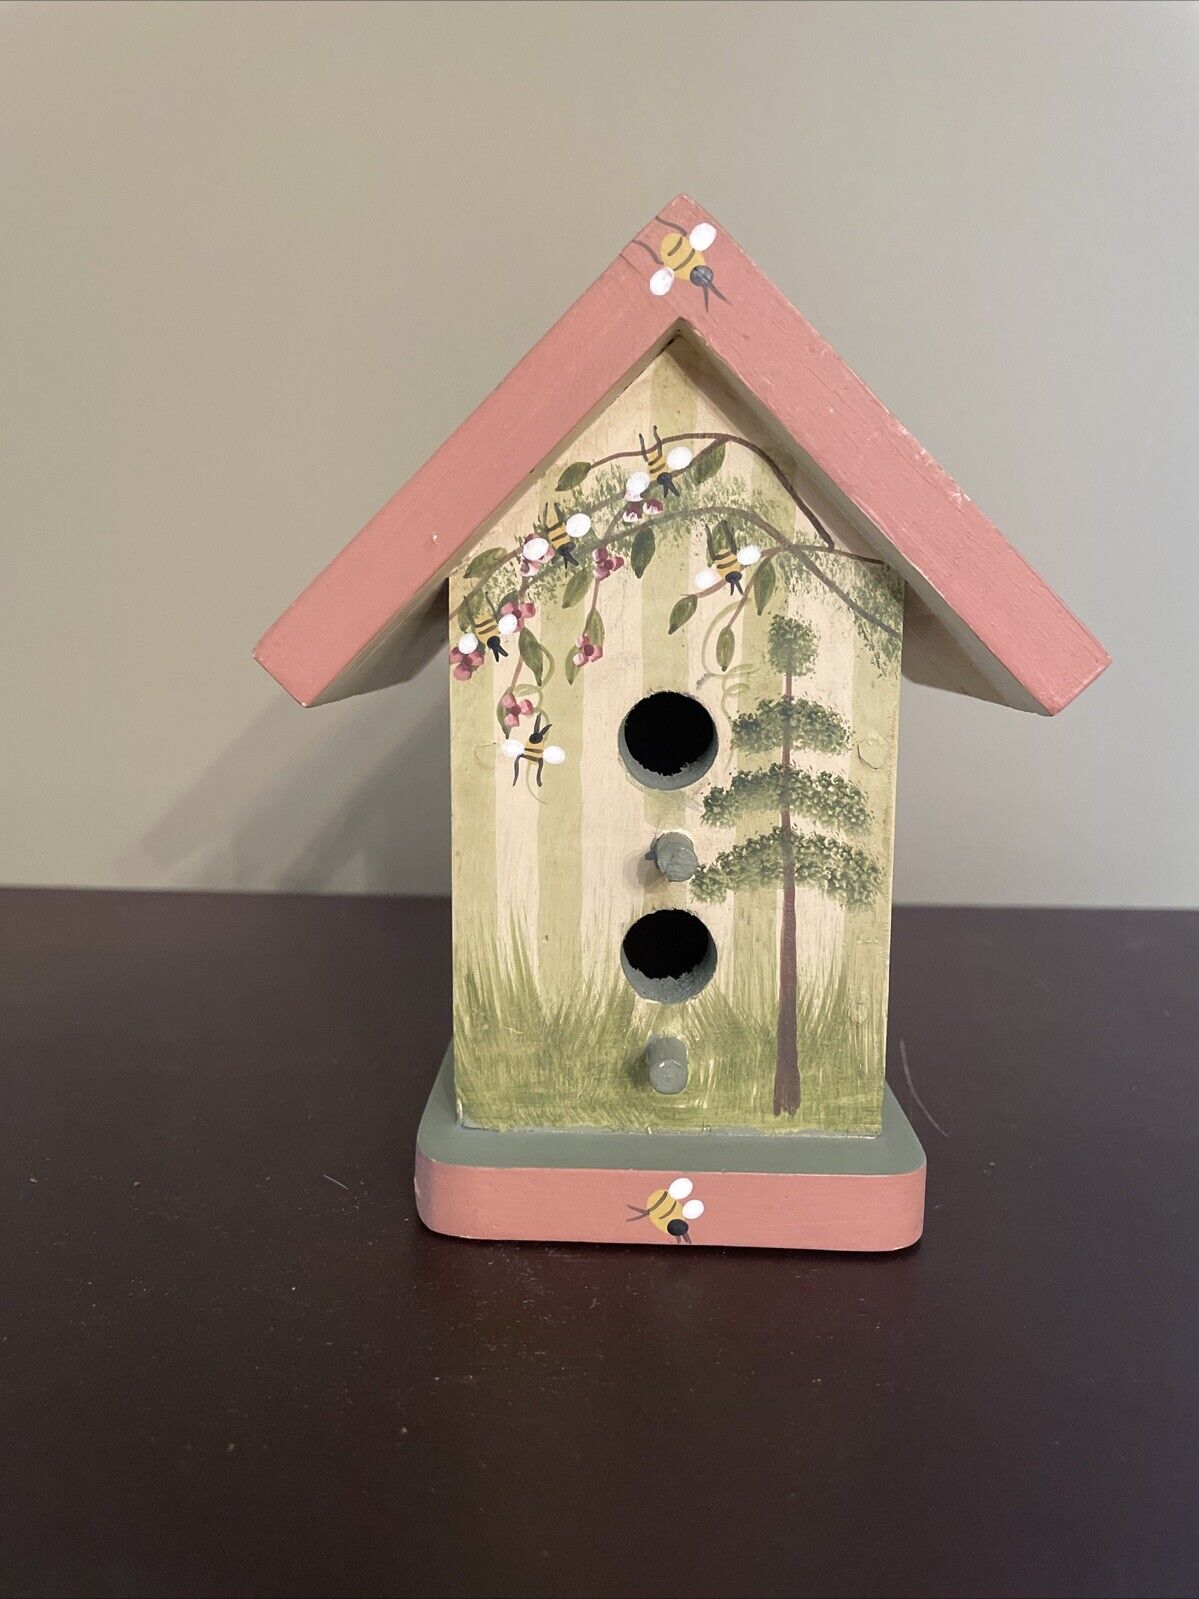 Vtg Mills River 1999 Ornamental Hand Crafted Bird House 6”x5” Honey Bees